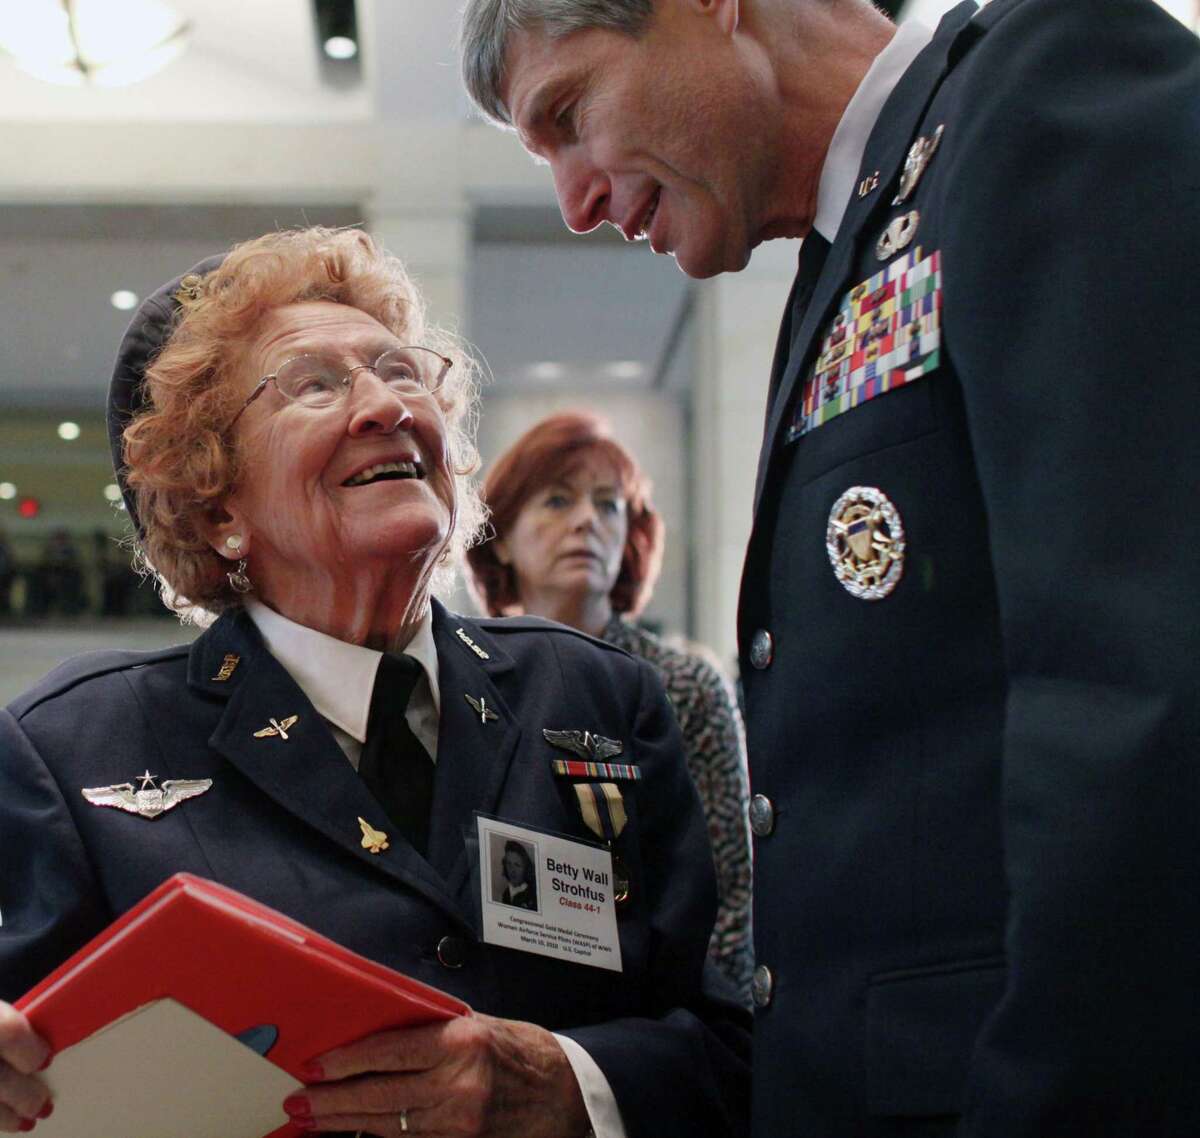 In this March 10, 2010 file photo, Air Force Chief of Staff Gen. Norton Schwartz greets Elizabeth Strohfus of Faribault, Minn., on Capitol Hill in Washington, before she and other members of the Women Airforce Service Pilots were awarded the Congressional Gold Medal.